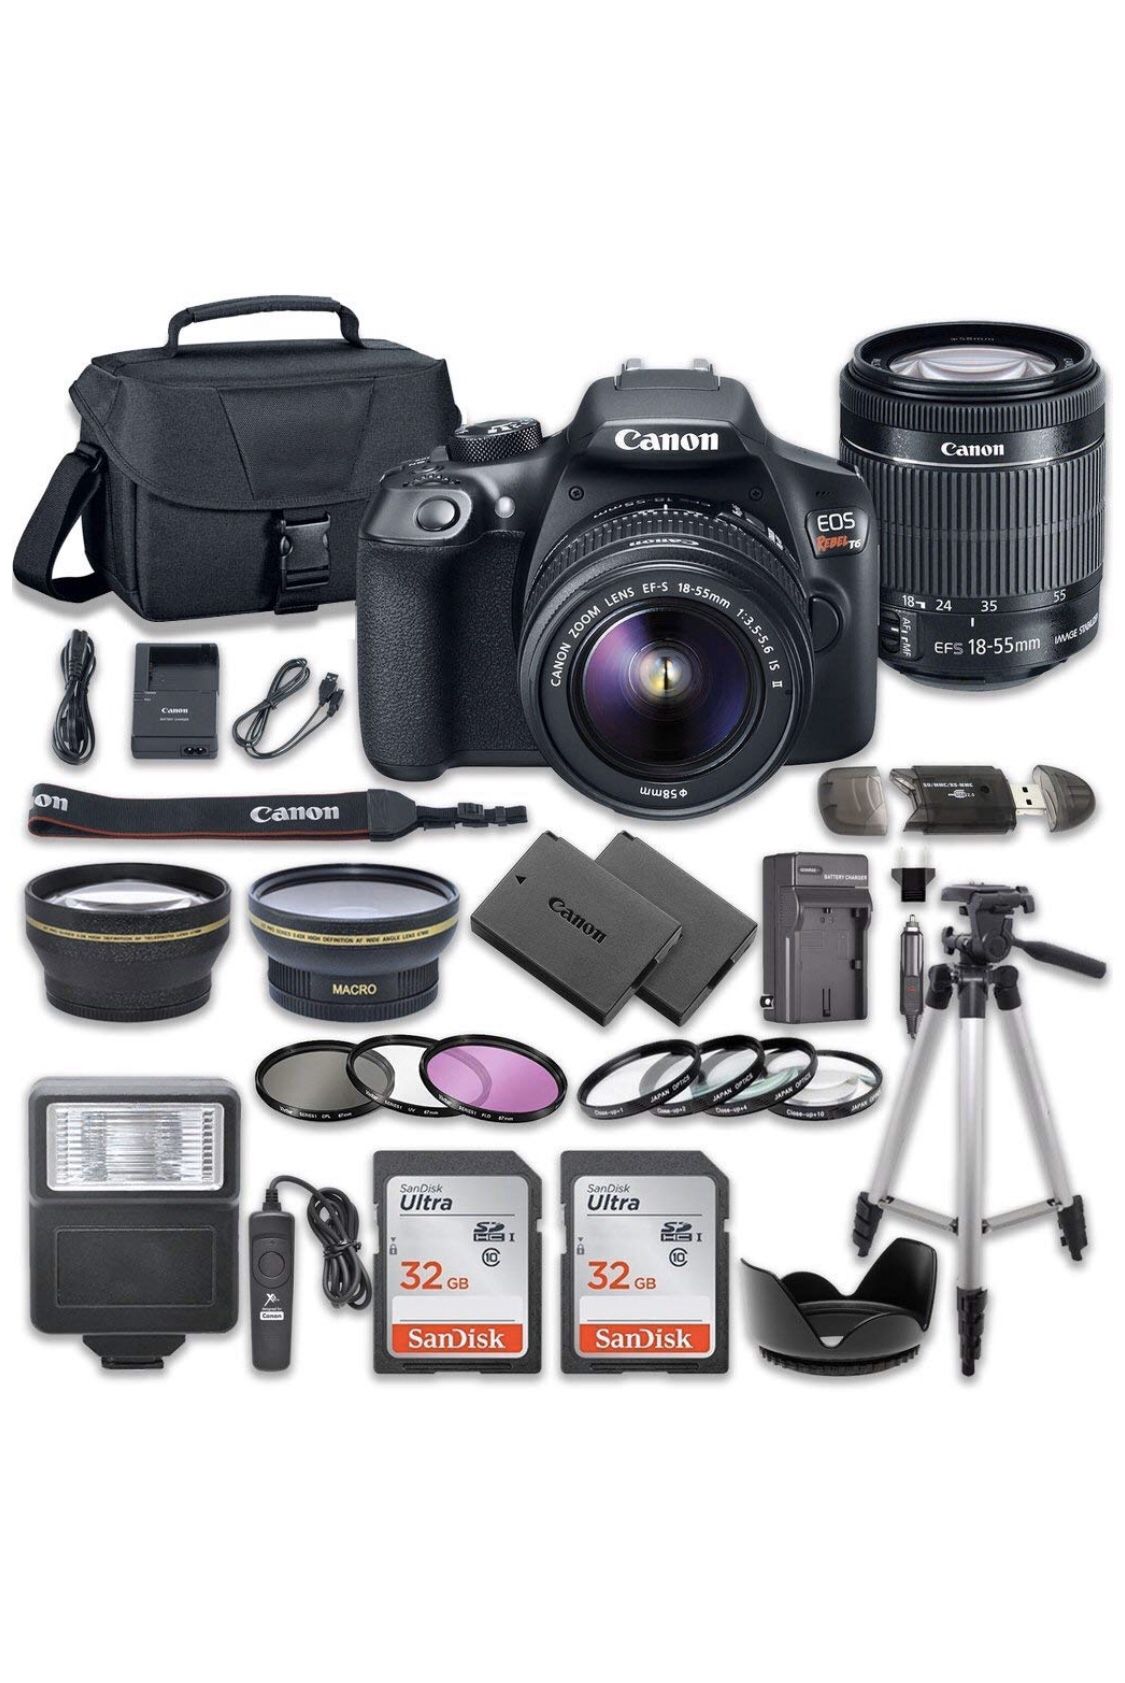 Canon EOS Rebel T6 DSLR Camera Bundle with Canon EF-S 18-55mm f/3.5-5.6 is II Lens + 2pc SanDisk 32GB Memory Cards + Premium Accessory Kit